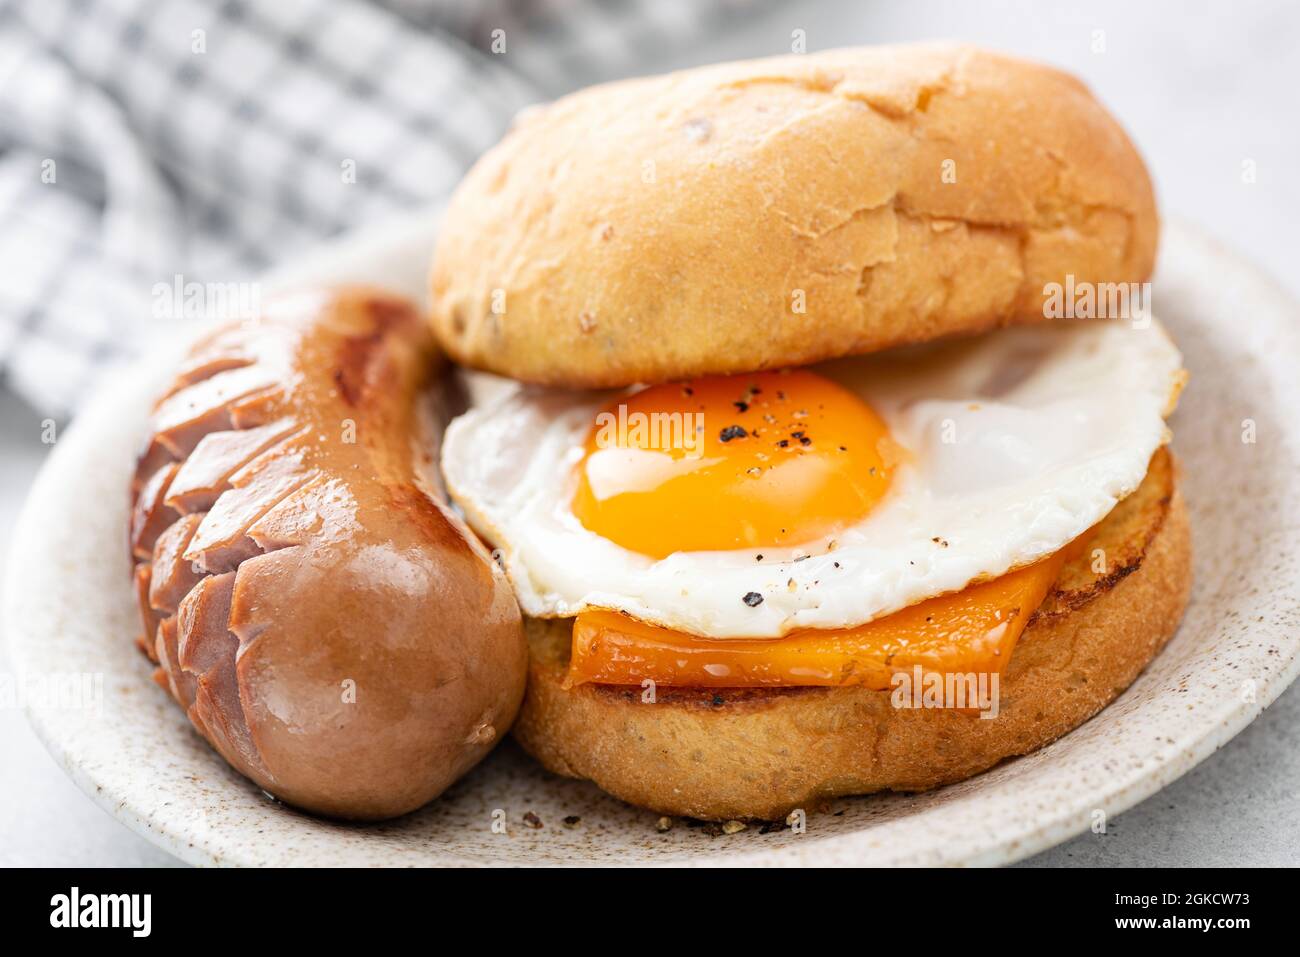 Breakfast sandwich with cheese, egg and sausage. English breakfast food closeup view. Unhealthy eating Stock Photo